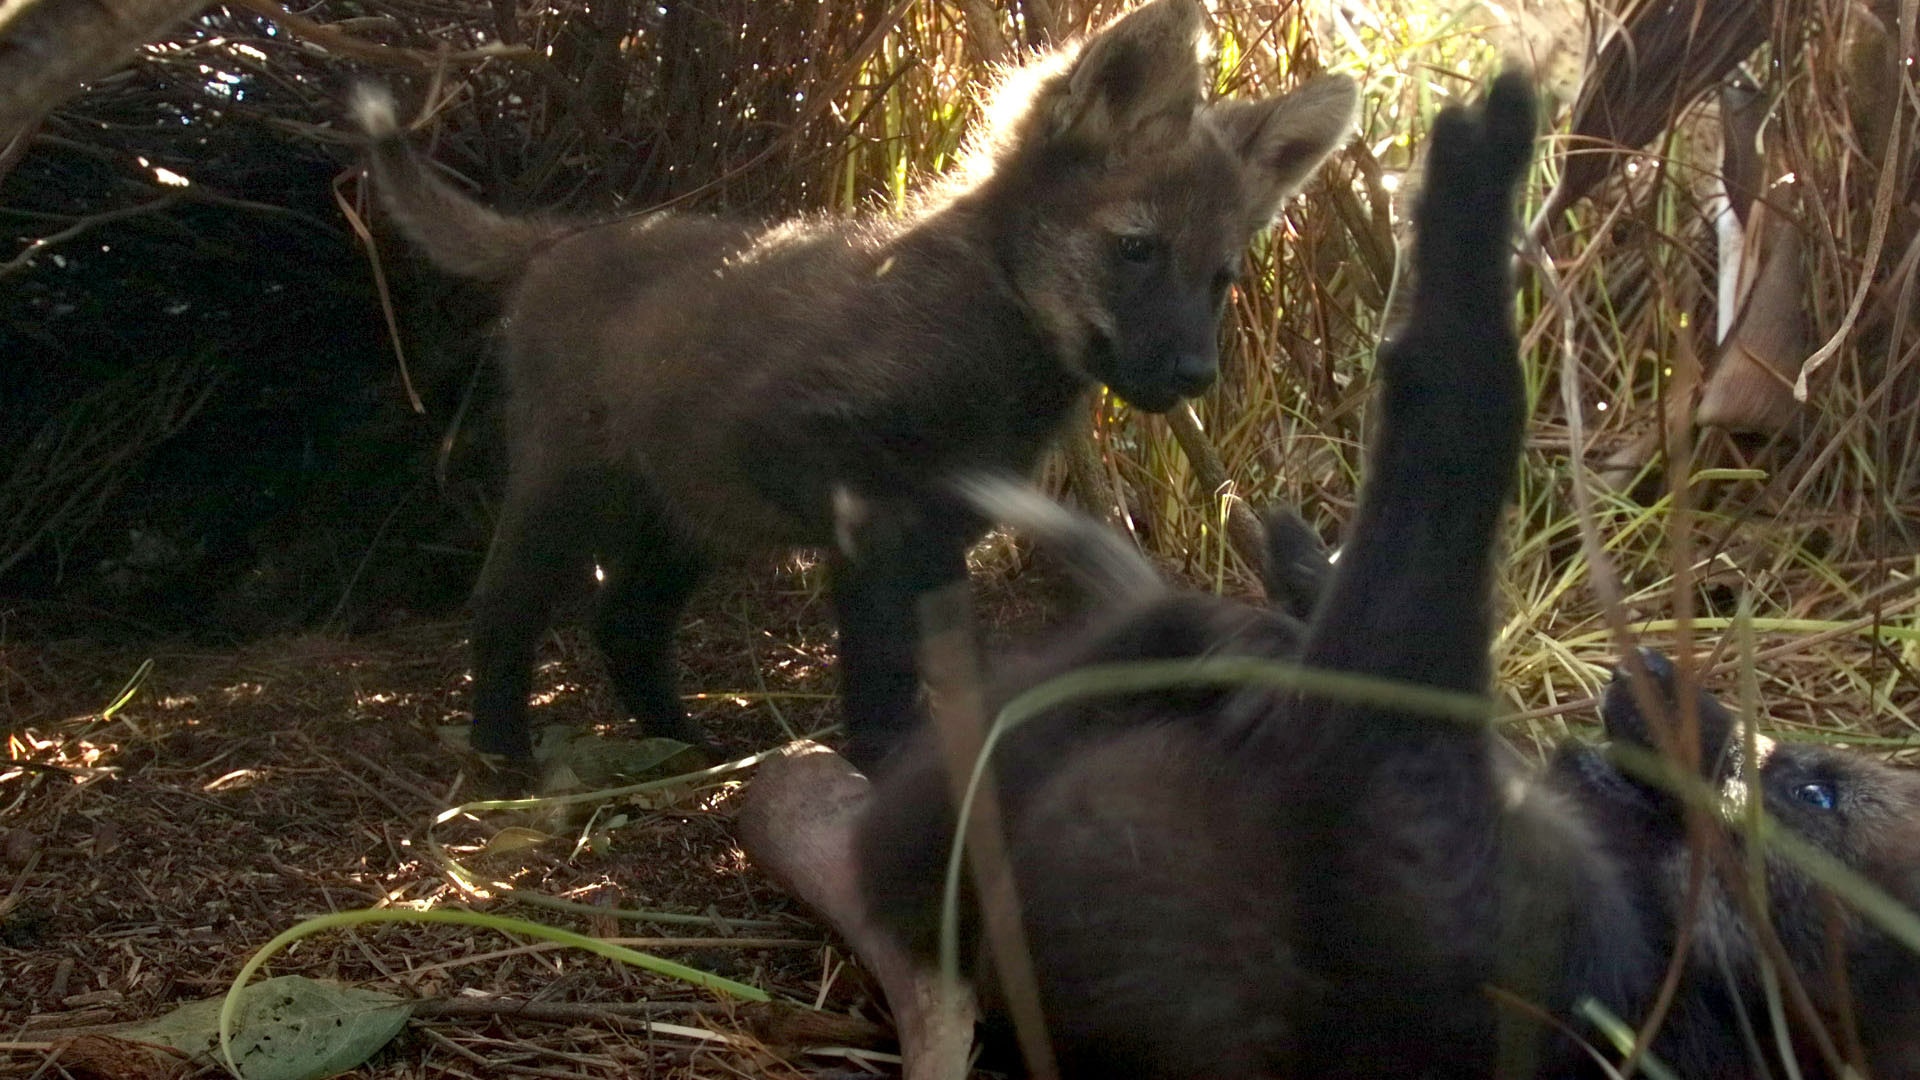 Maned wolf cubs